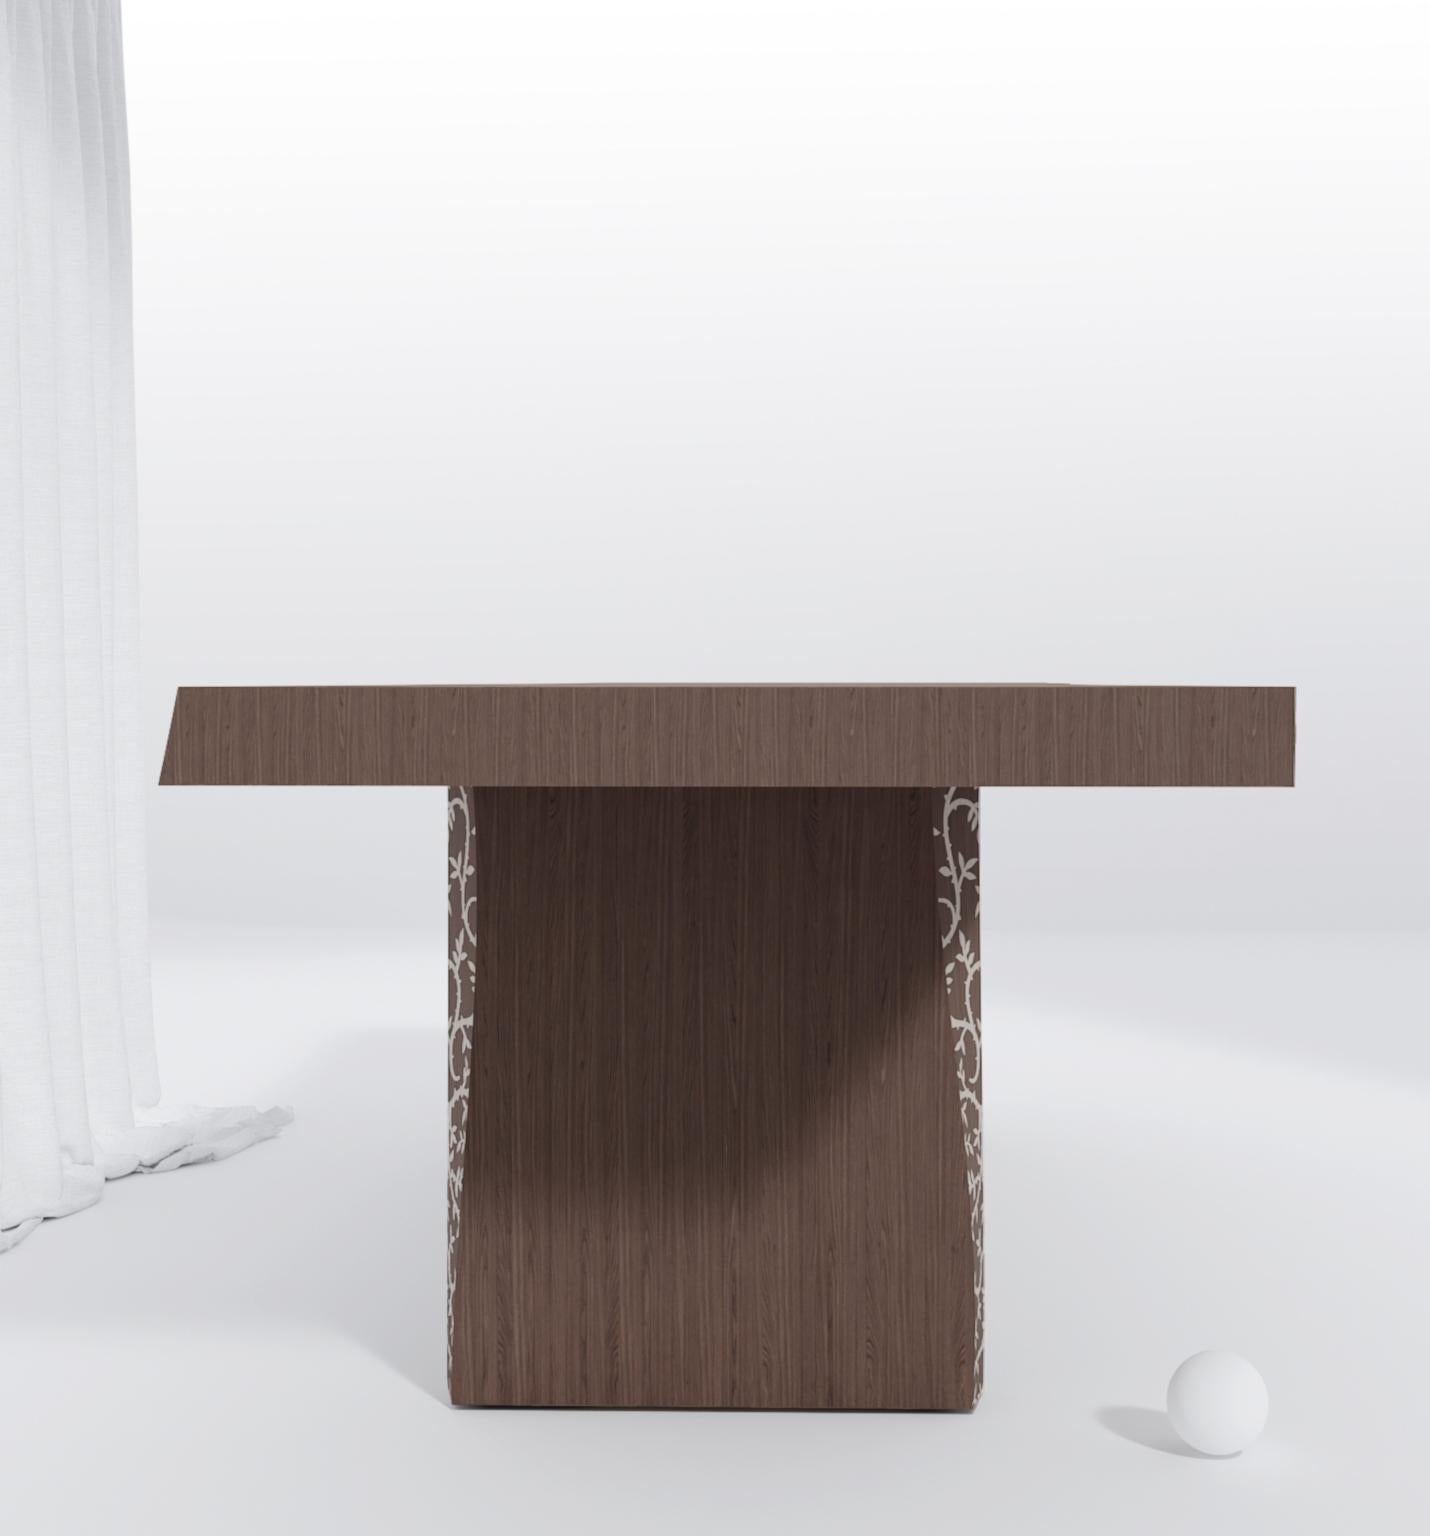 Modern 21st Century Marcantonio Dining Table Wood Inlay Bark Table Scapin Collezioni For Sale